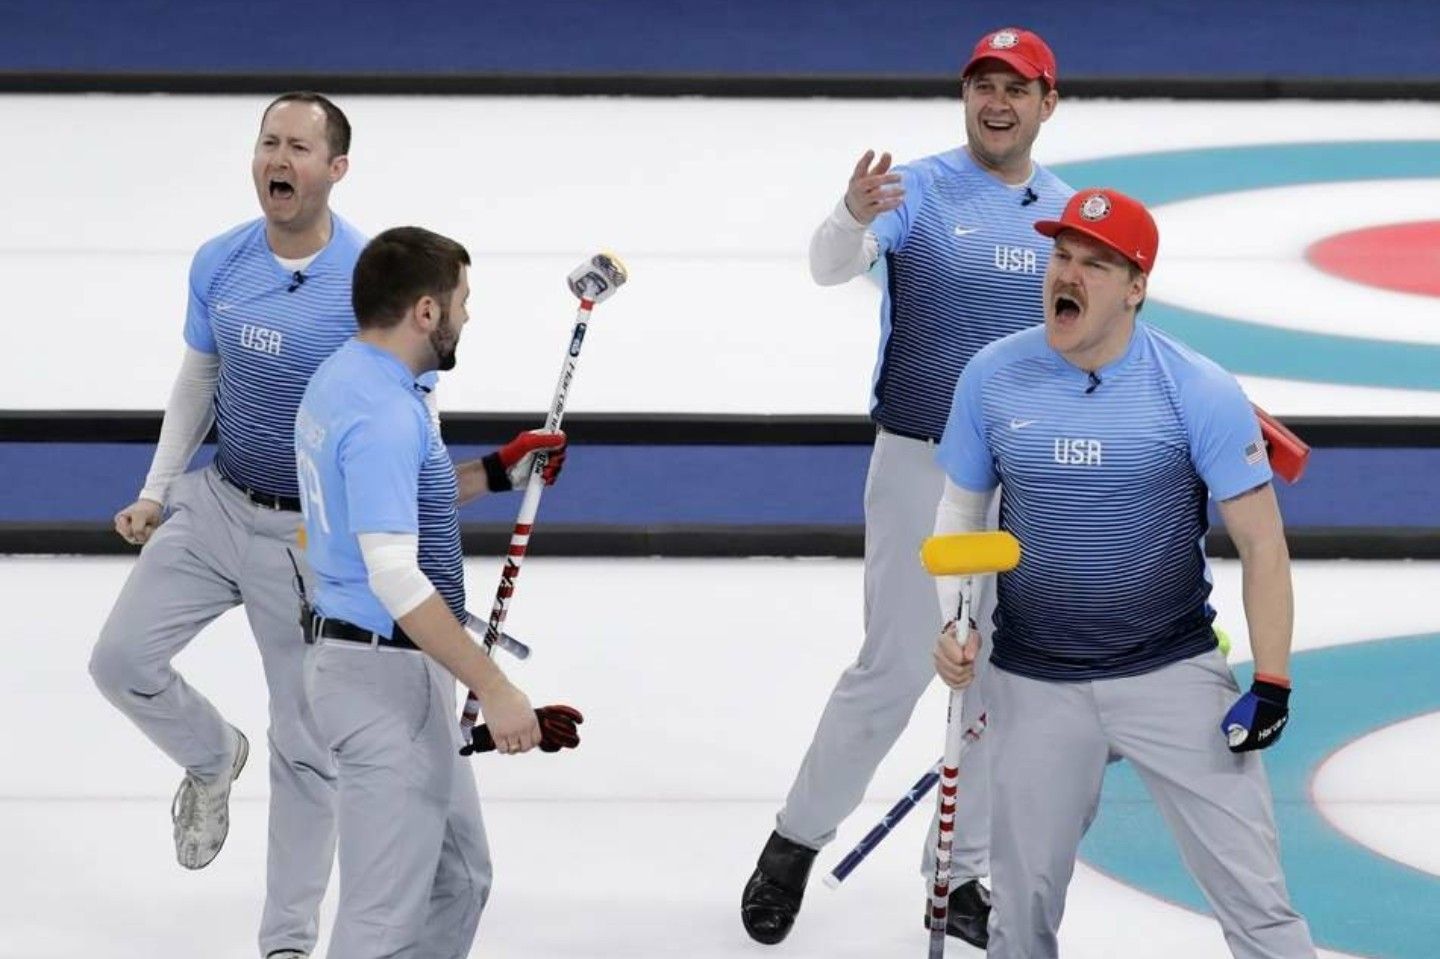 Curling... The one Olympic sport you can look like a normal human being and still win.